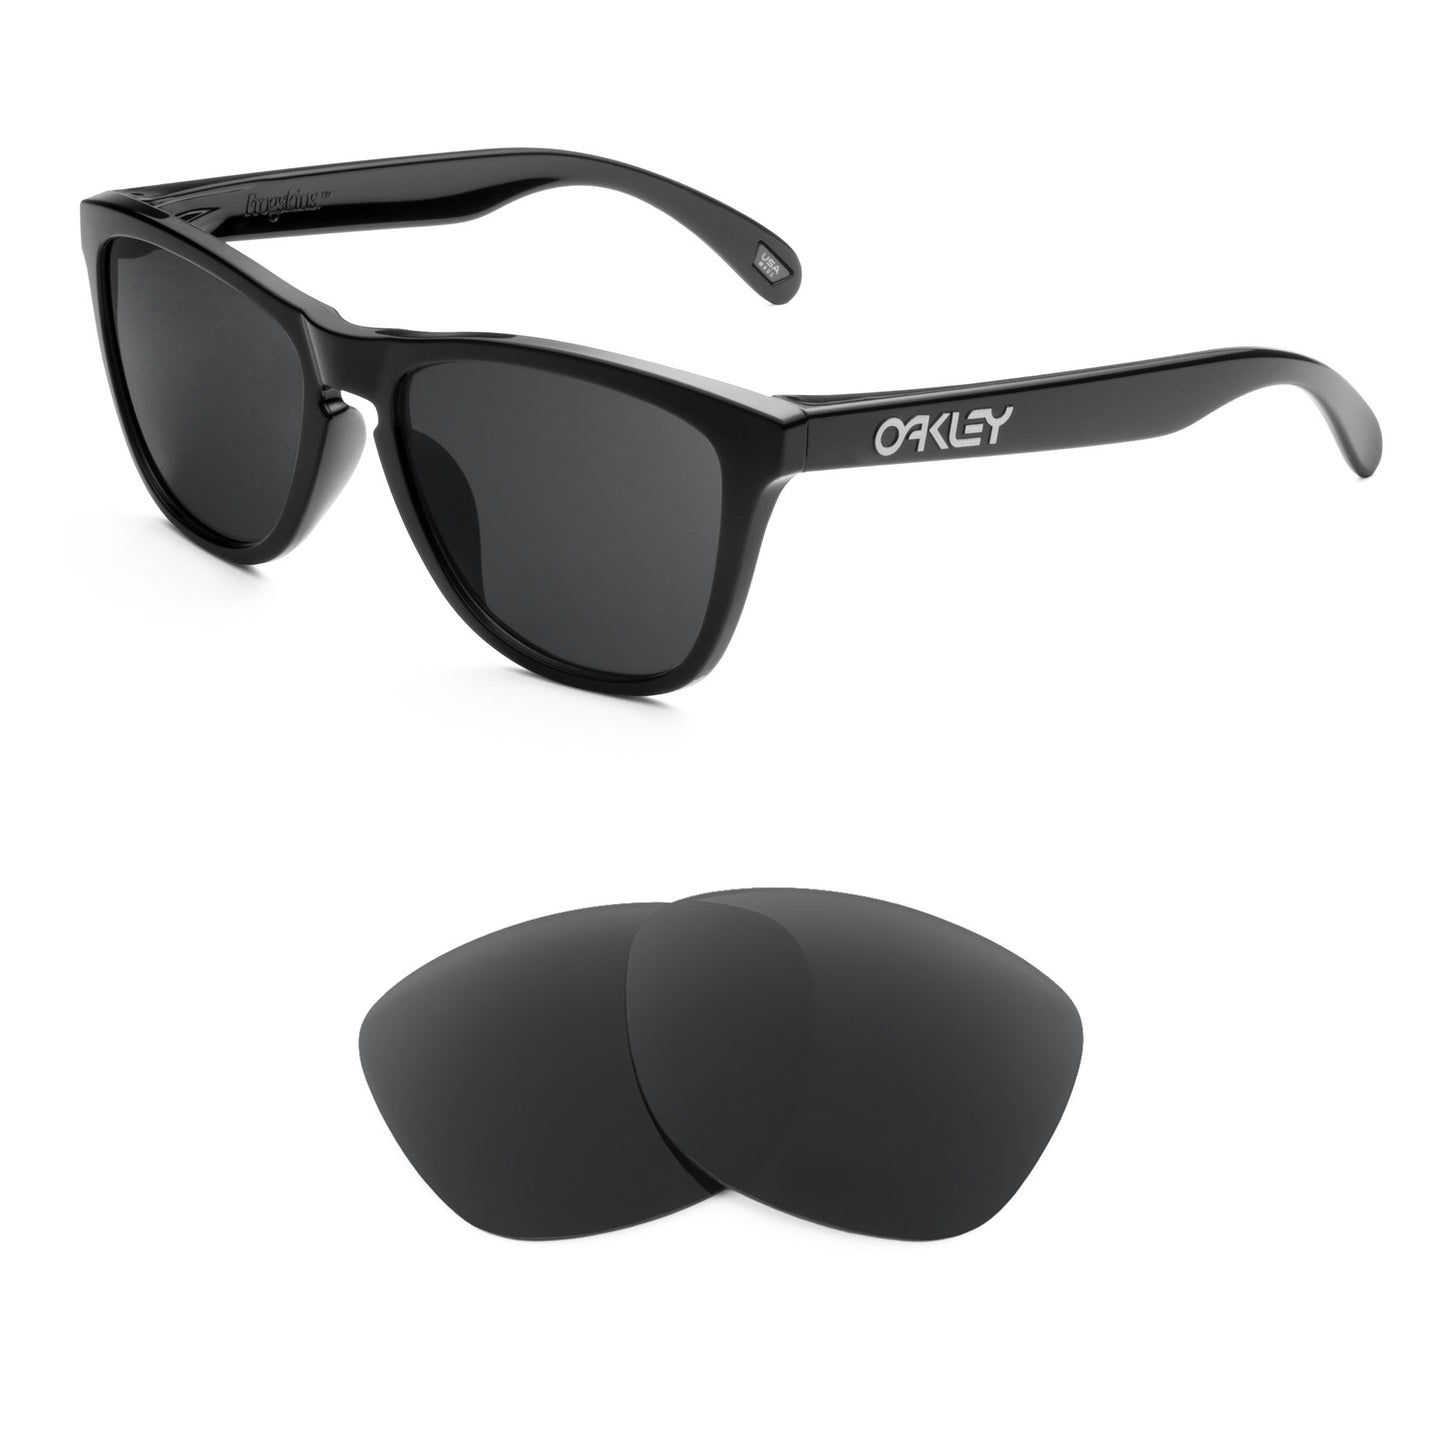 Oakley Frogskins (Low Bridge Fit) sunglasses with replacement lenses